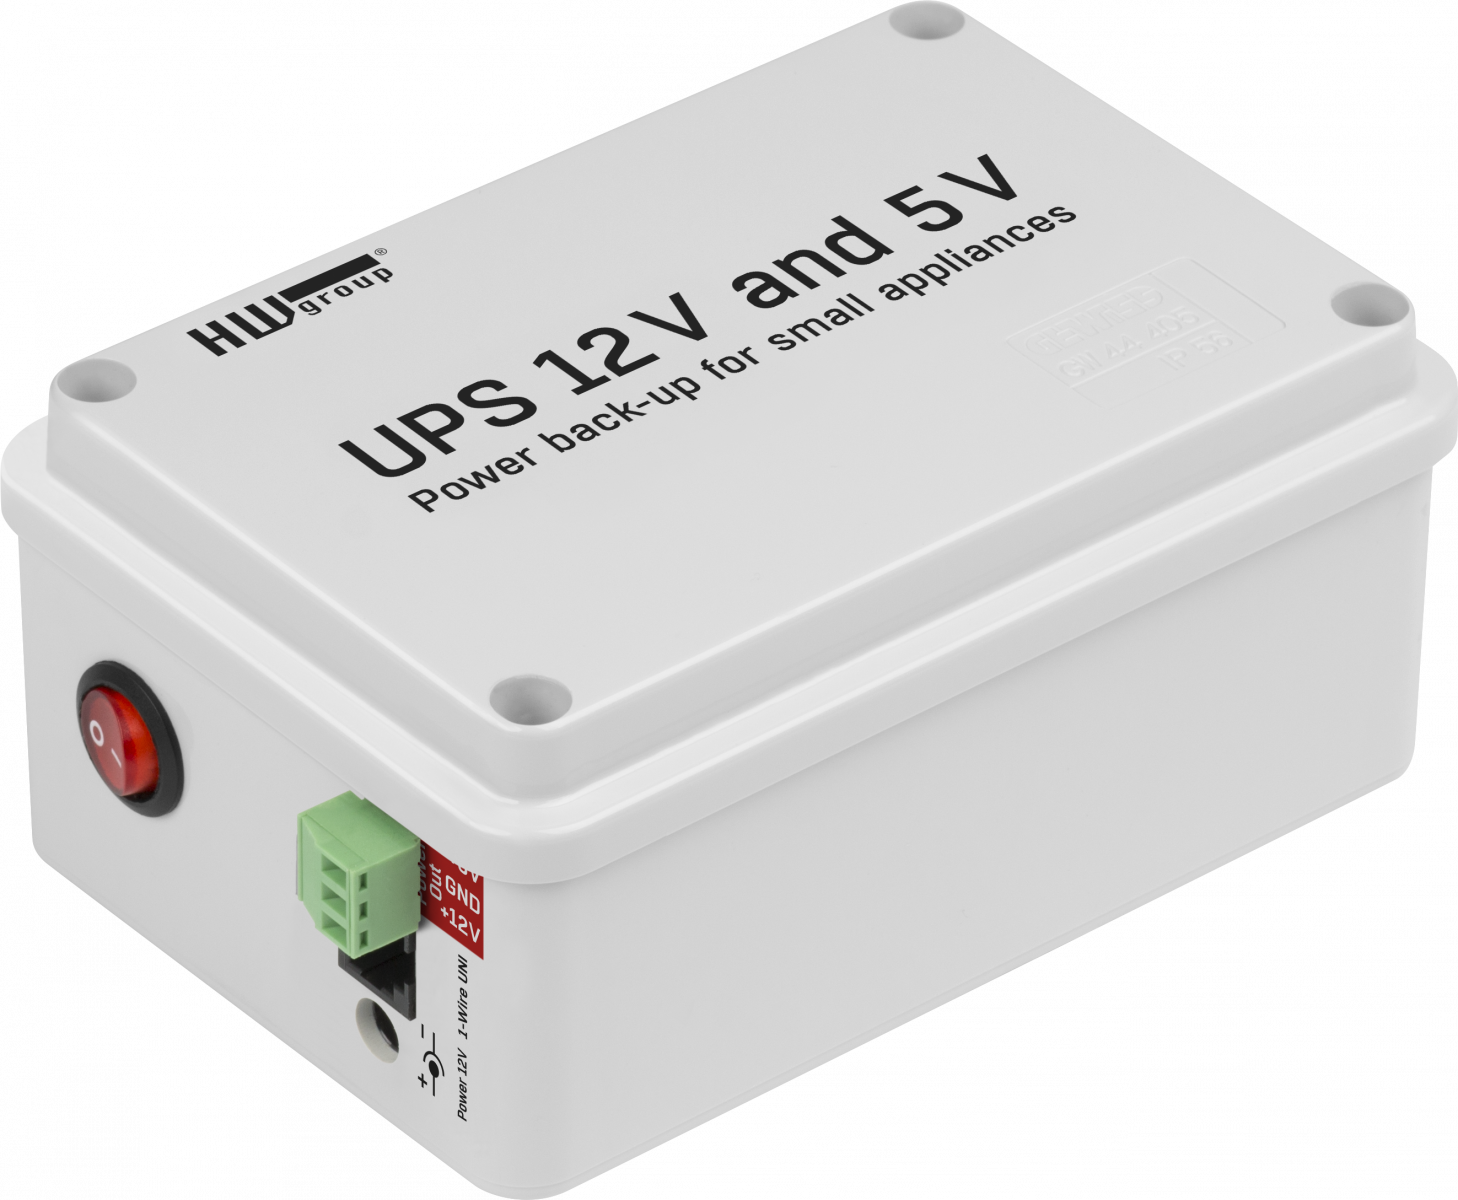 https://www.hw-group.com/files/styles/large/public/devices-photos/7866-ups-12v-and-5v/ups12vand5v-600663id1052.png